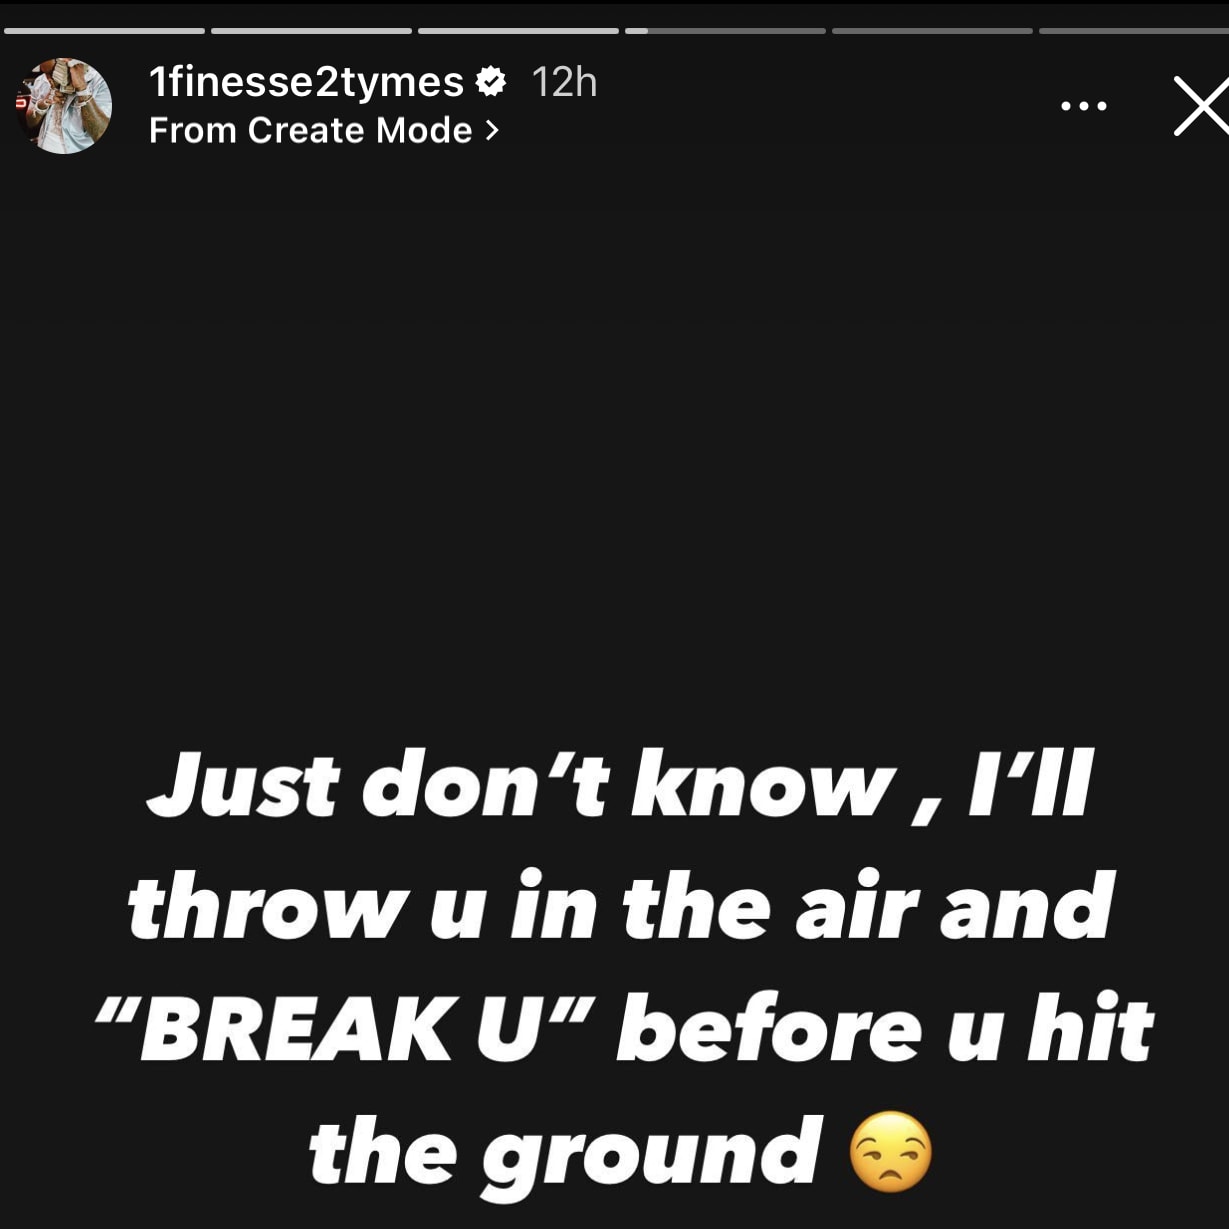 finesse2tymes is seen posting on instagram